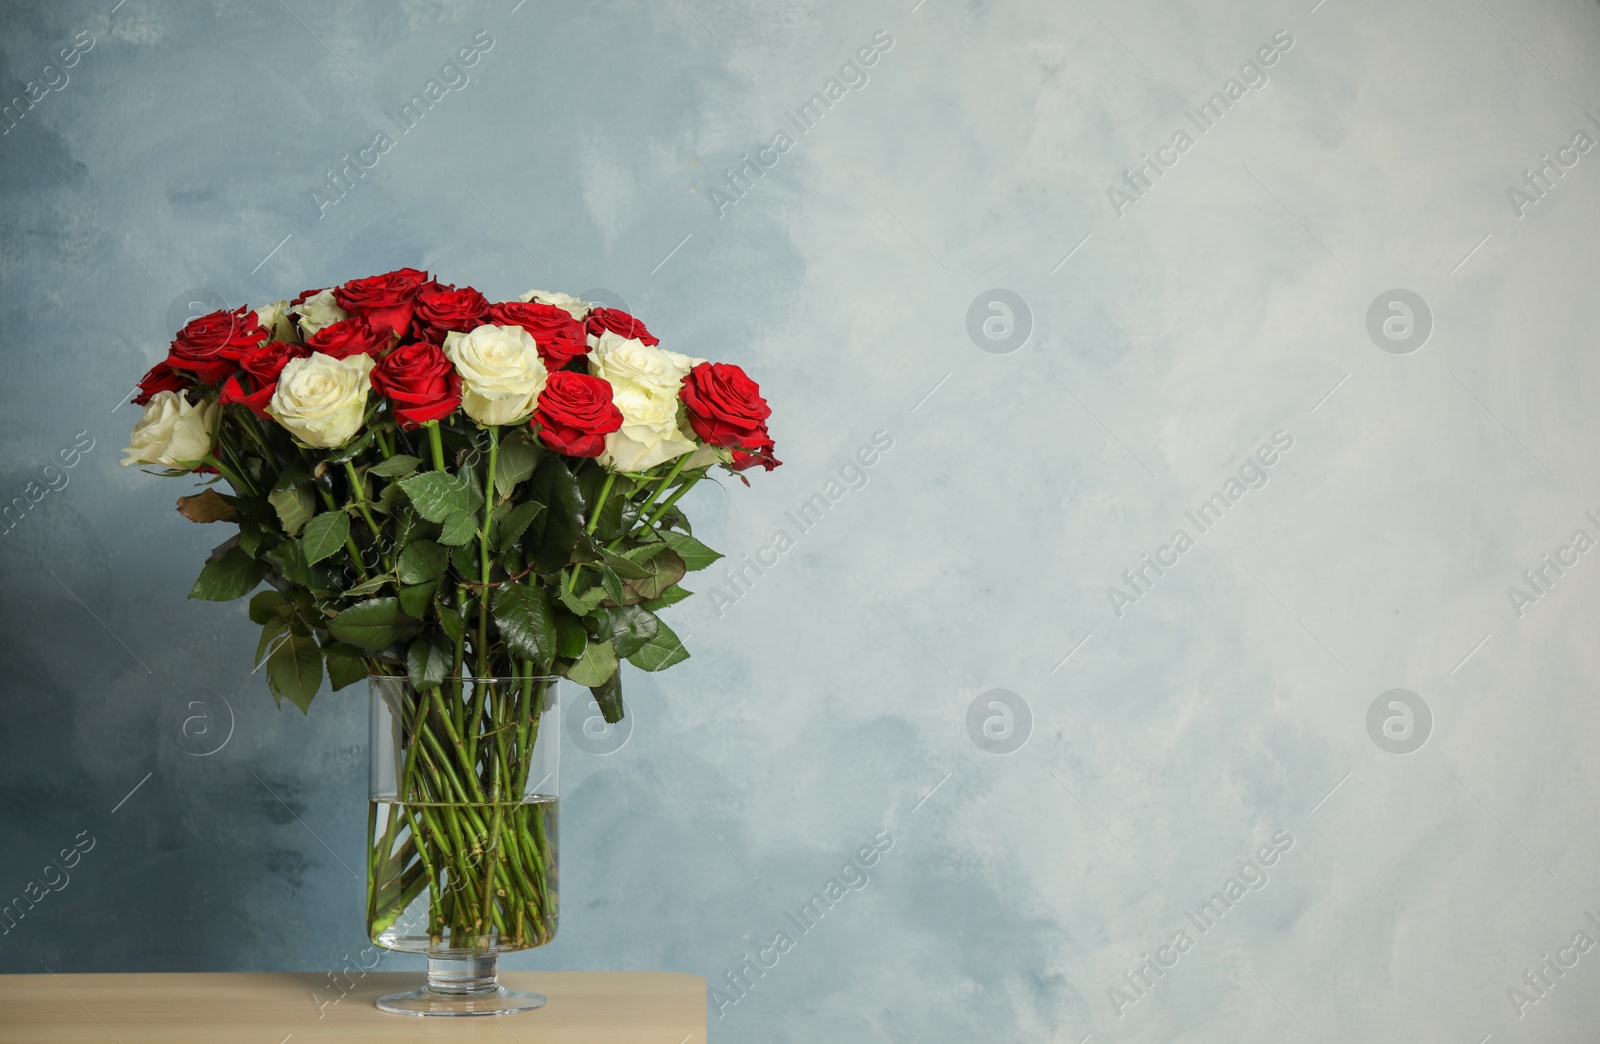 Photo of Luxury bouquet of fresh roses on wooden table. Space for text